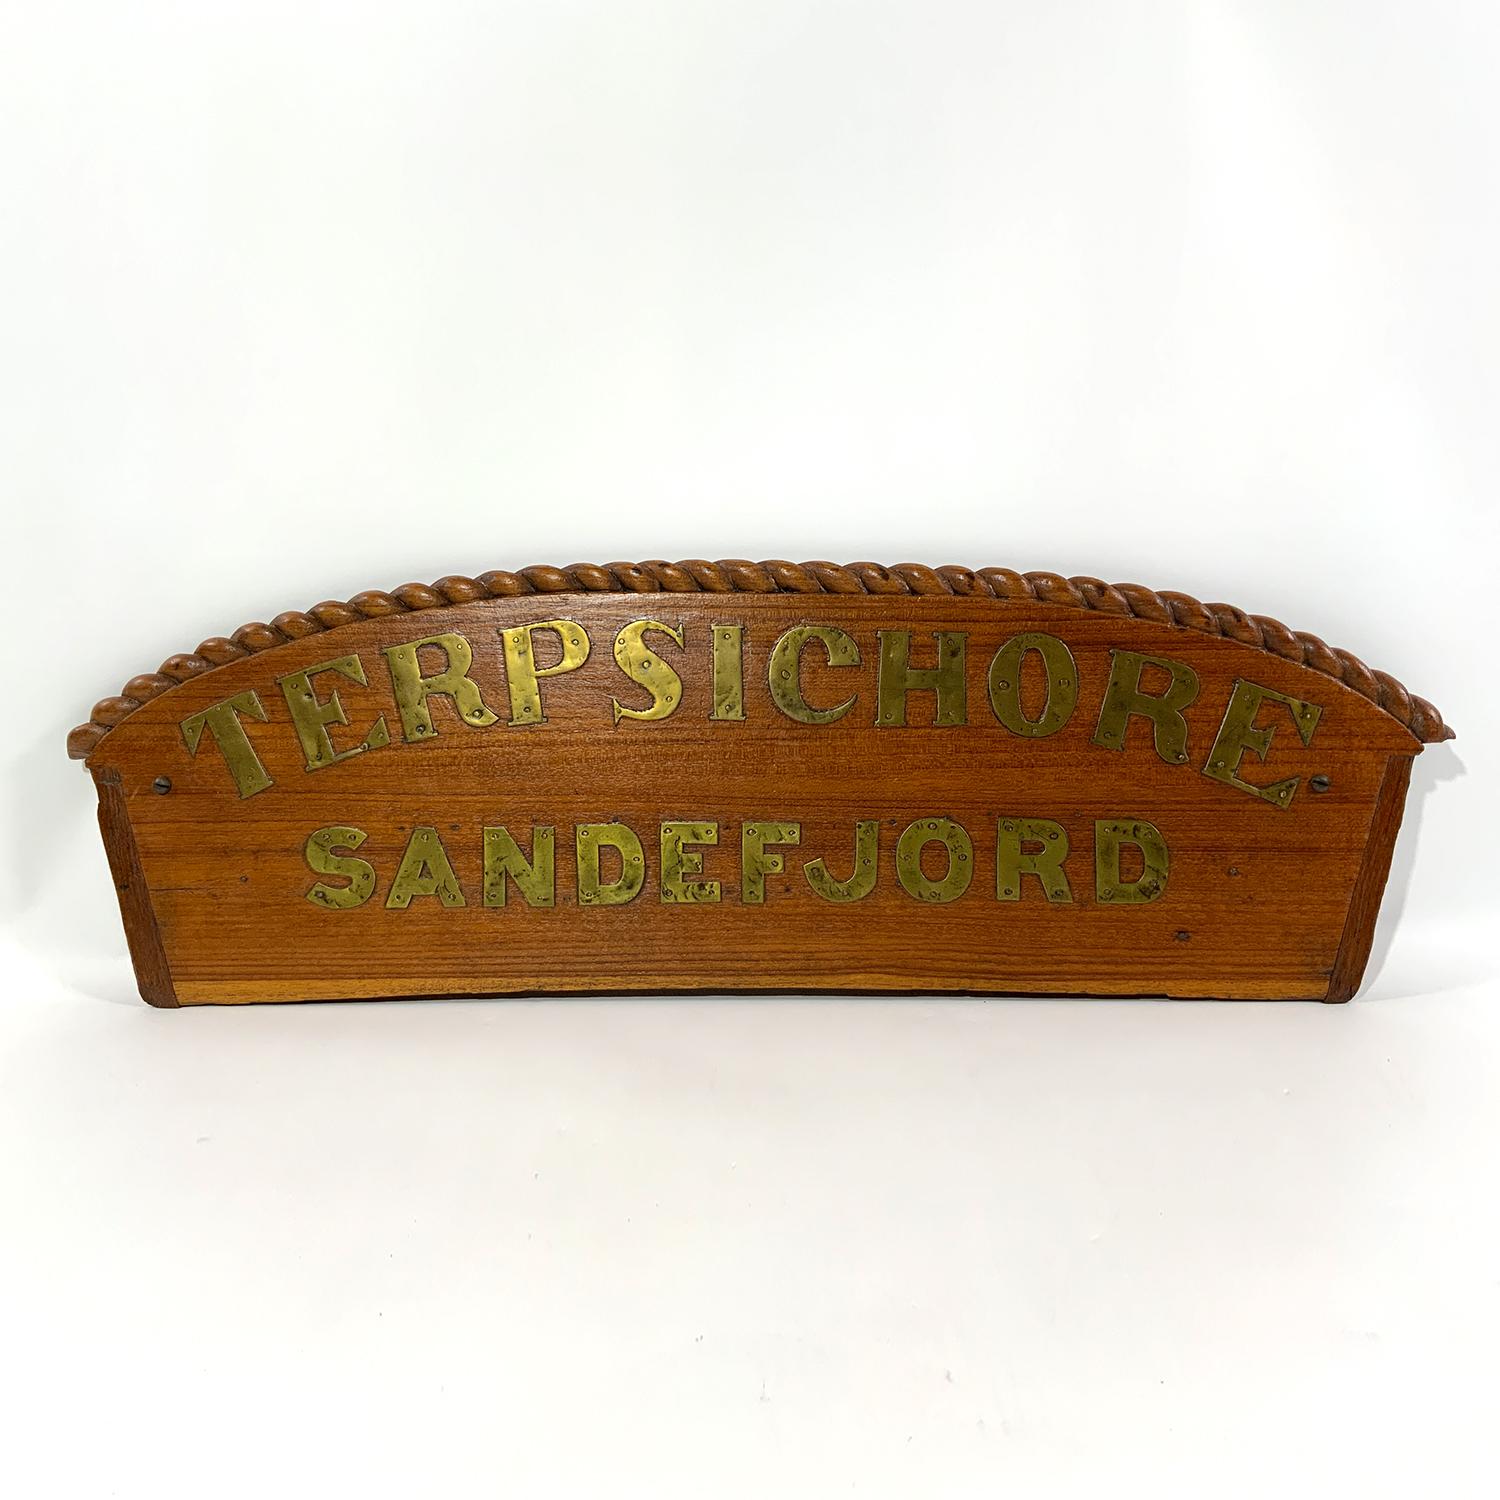 Captain's gig sternboard hardwood with rope carved border and brass lettering 